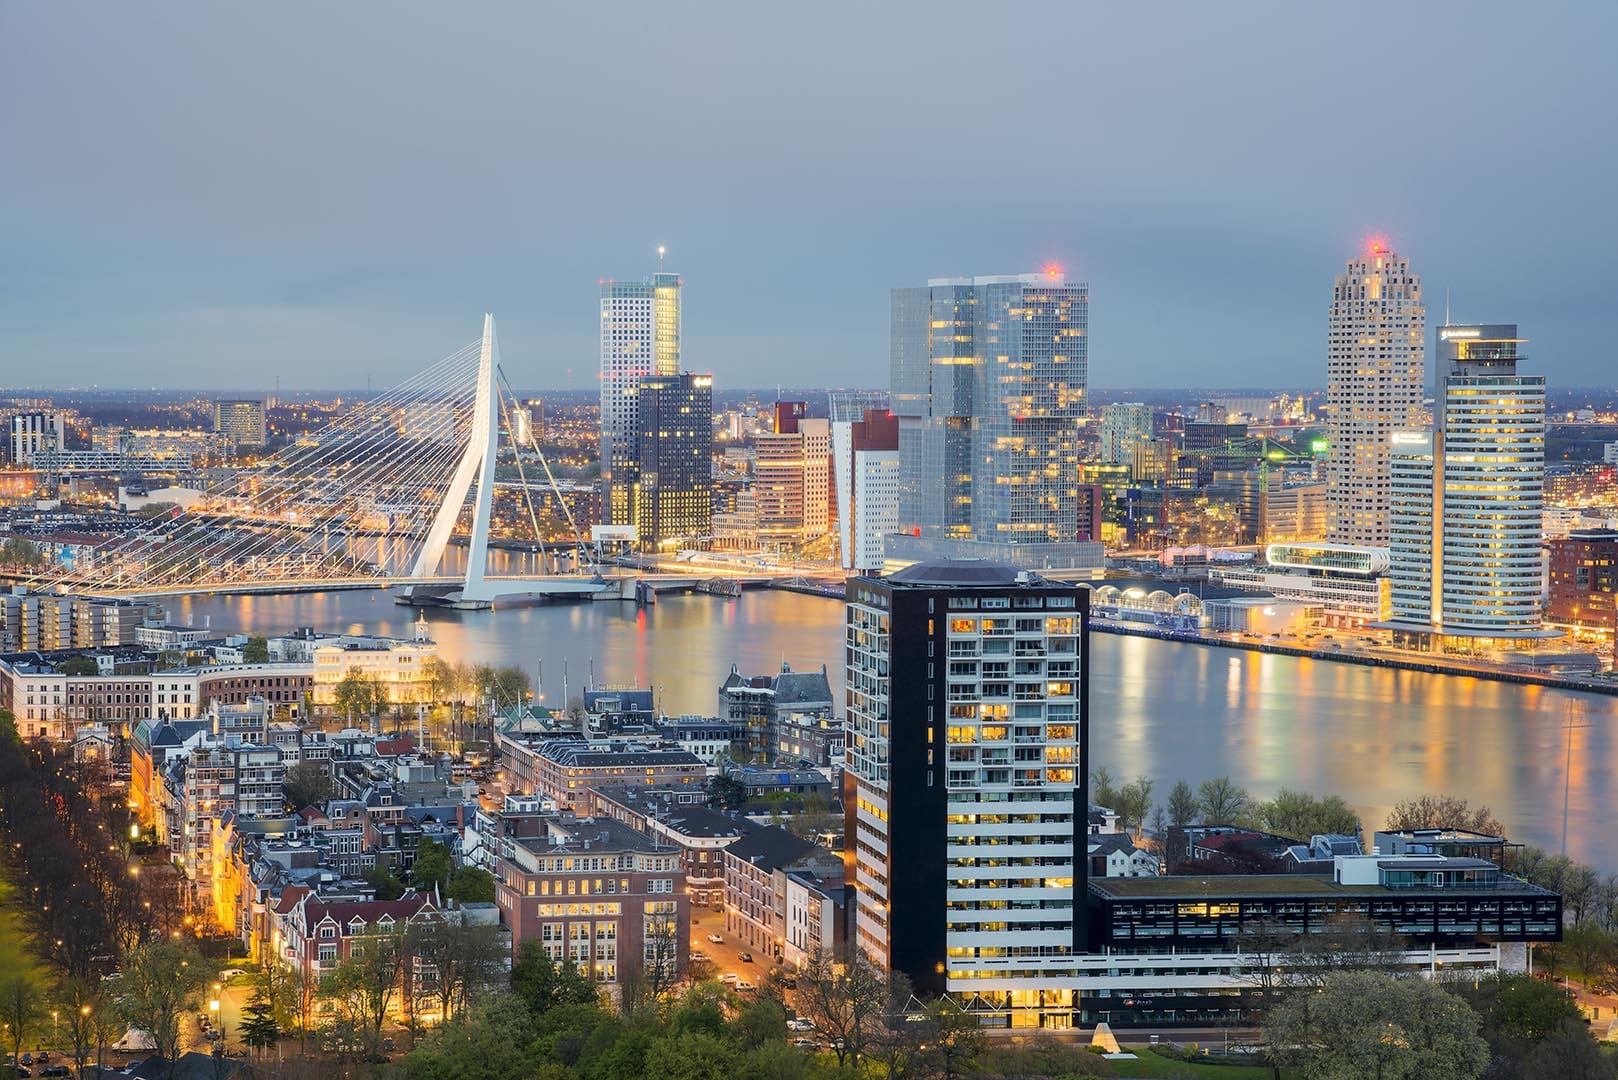 Eurovision 2020: A tale of two cities: Rotterdam vs Maastricht